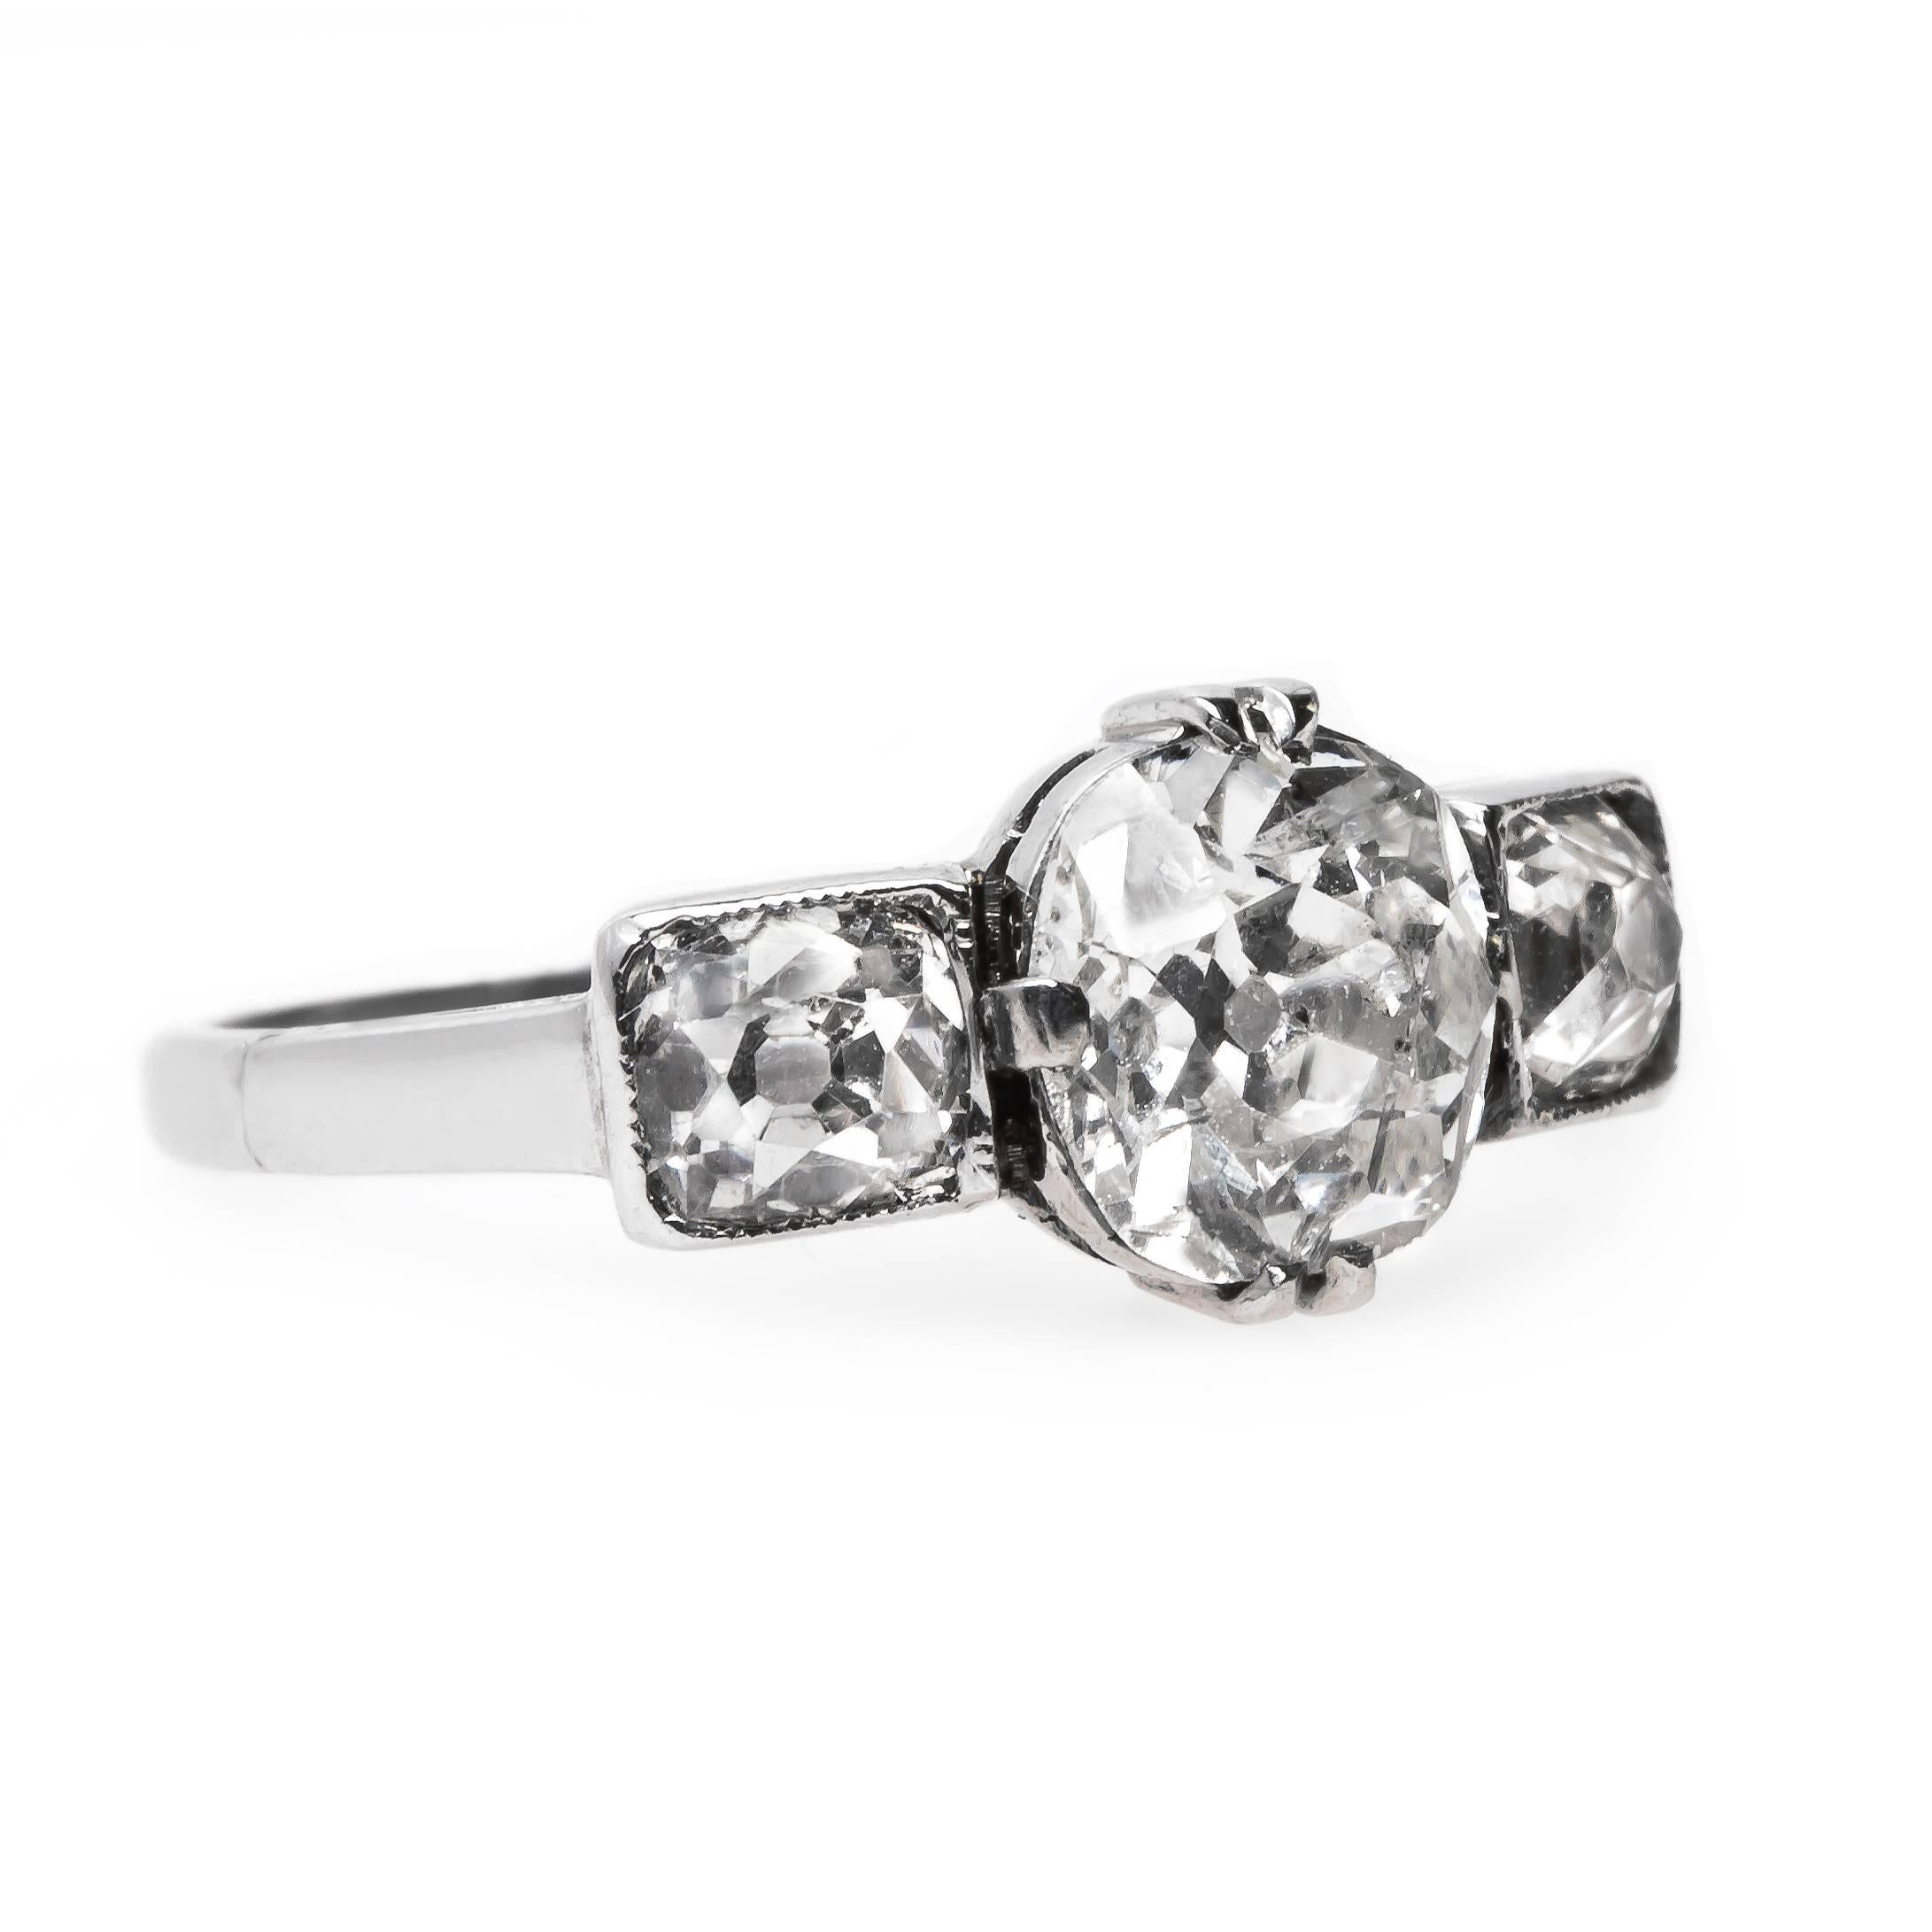 Cobble Hill is a fantastic and authentic early Edwardian era (circa 1905) platinum engagement ring featuring the classic three-stone combination. The ring centers a talon and single prong set 1.04ct EGL certified Old Mine Cushion Cut diamond graded